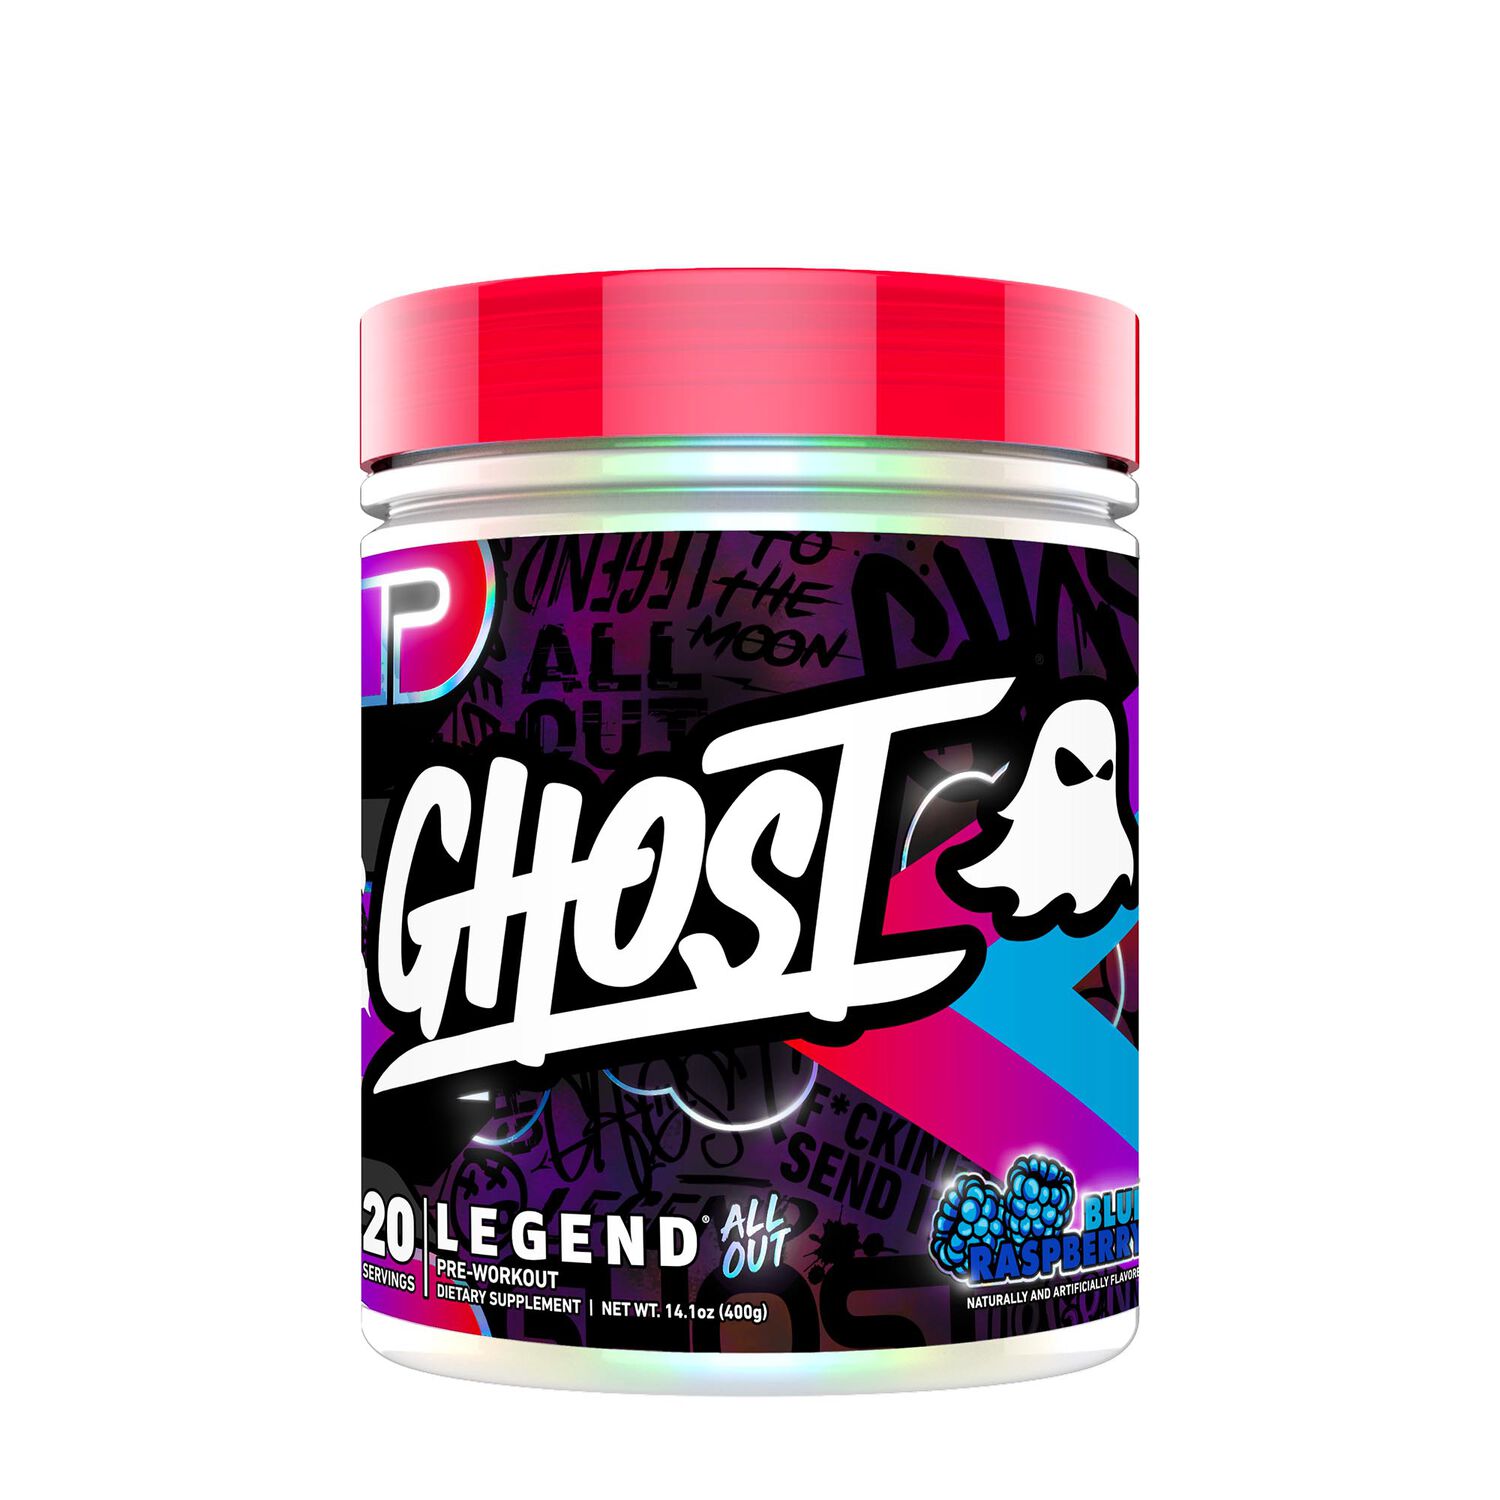 Ghost Legend All Out Pre-Workout - Warheads Sour Green Apple - 16.2 oz